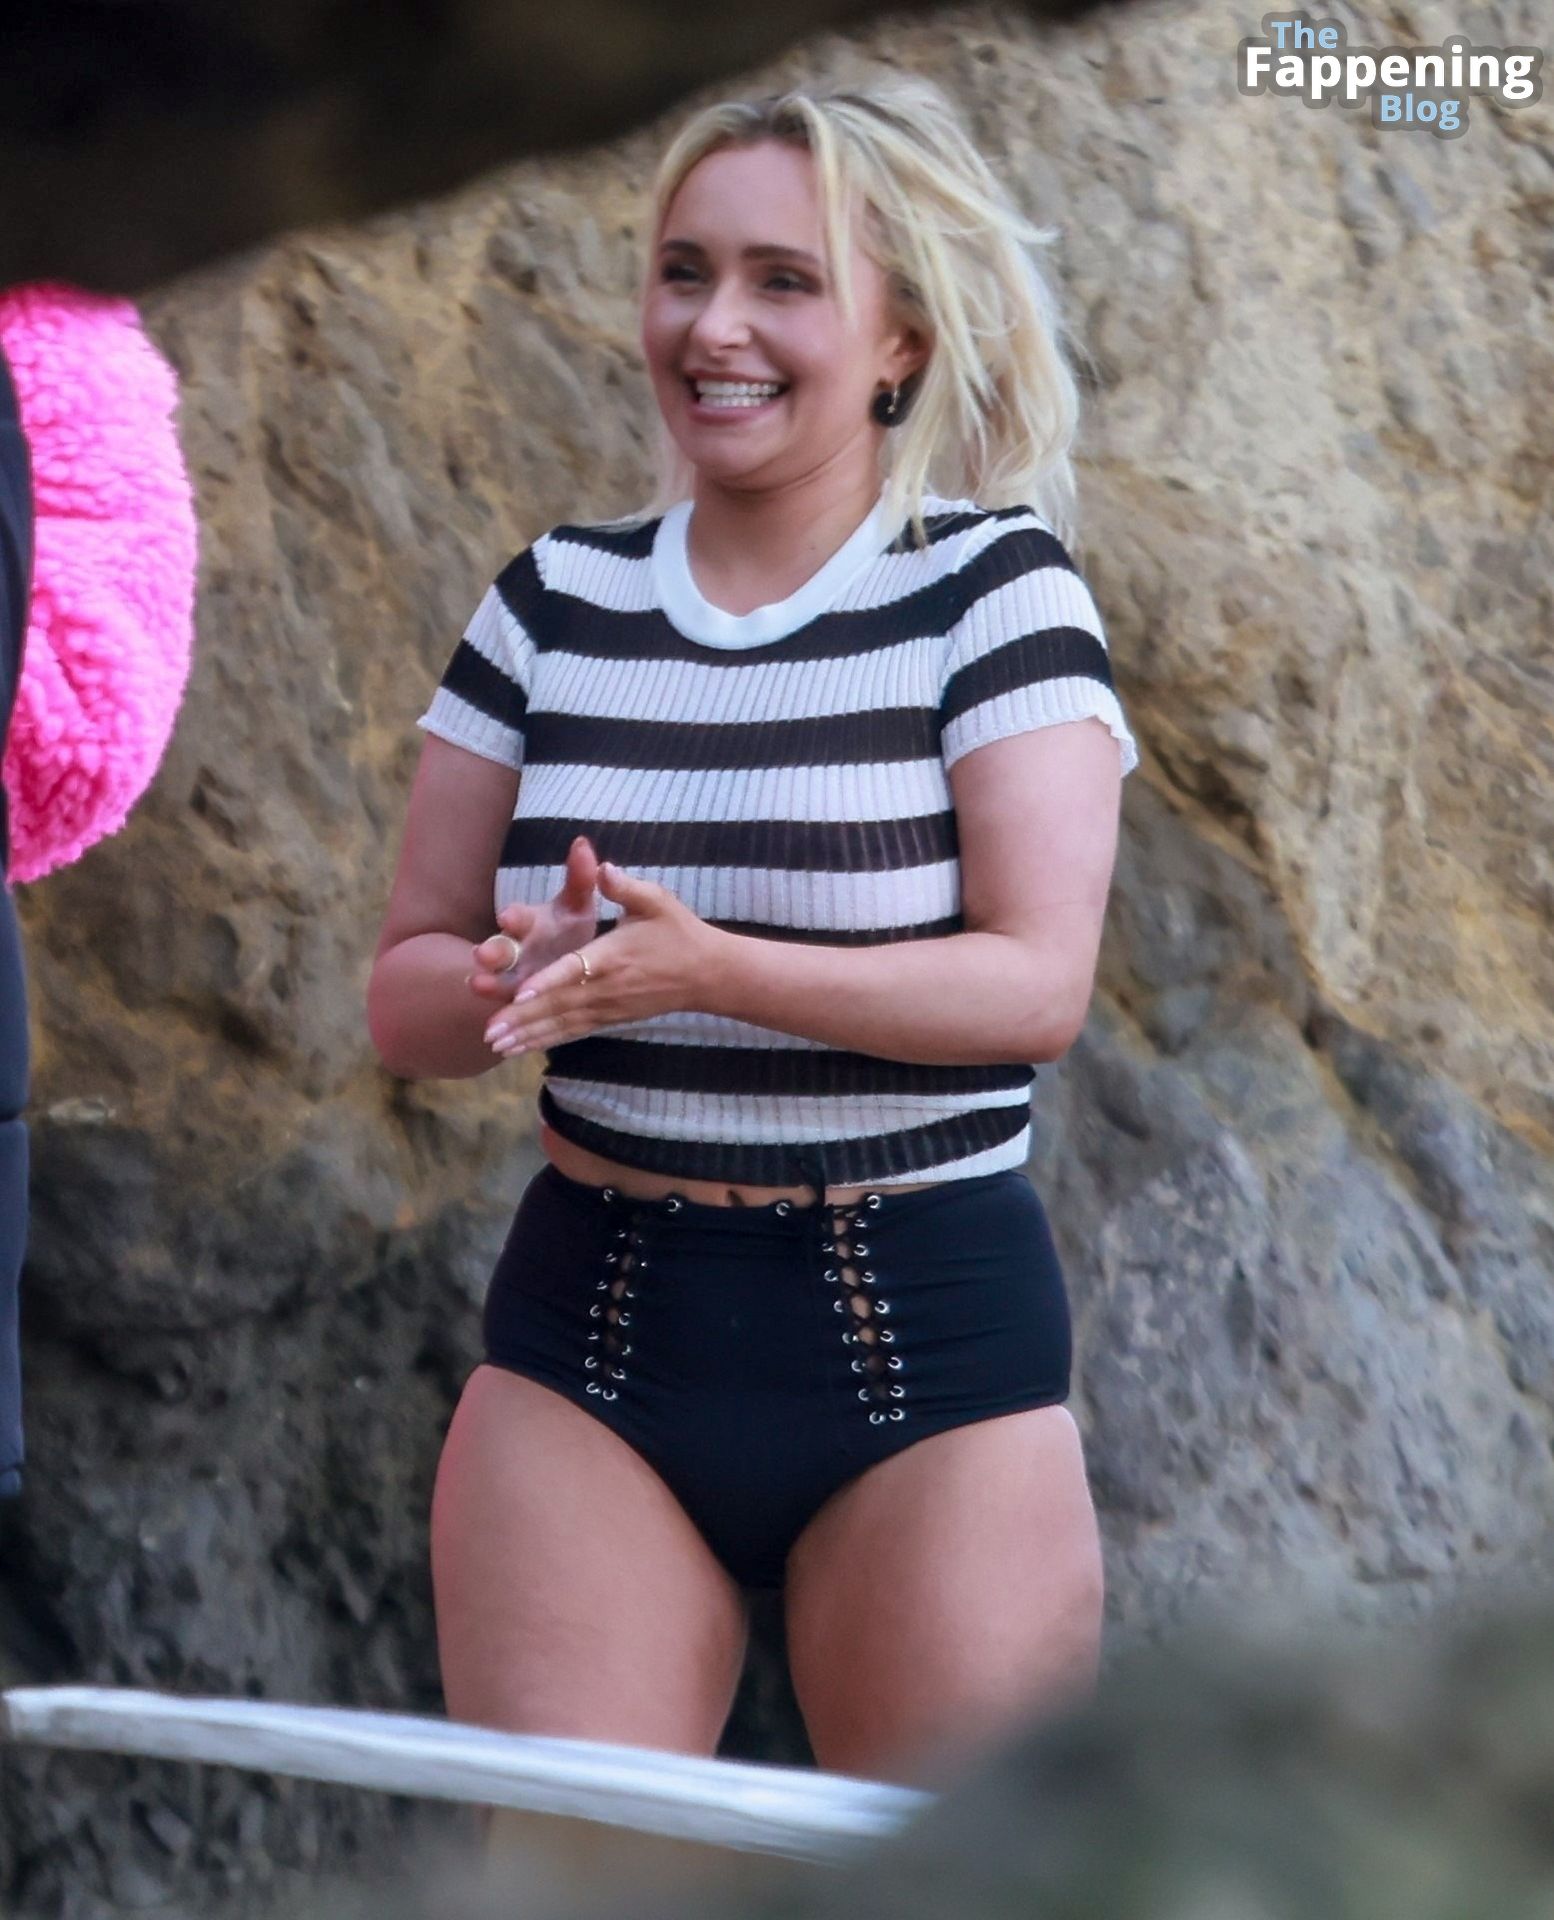 Hayden-Panettiere-Sexy-The-Fappening-Blog-11.jpg